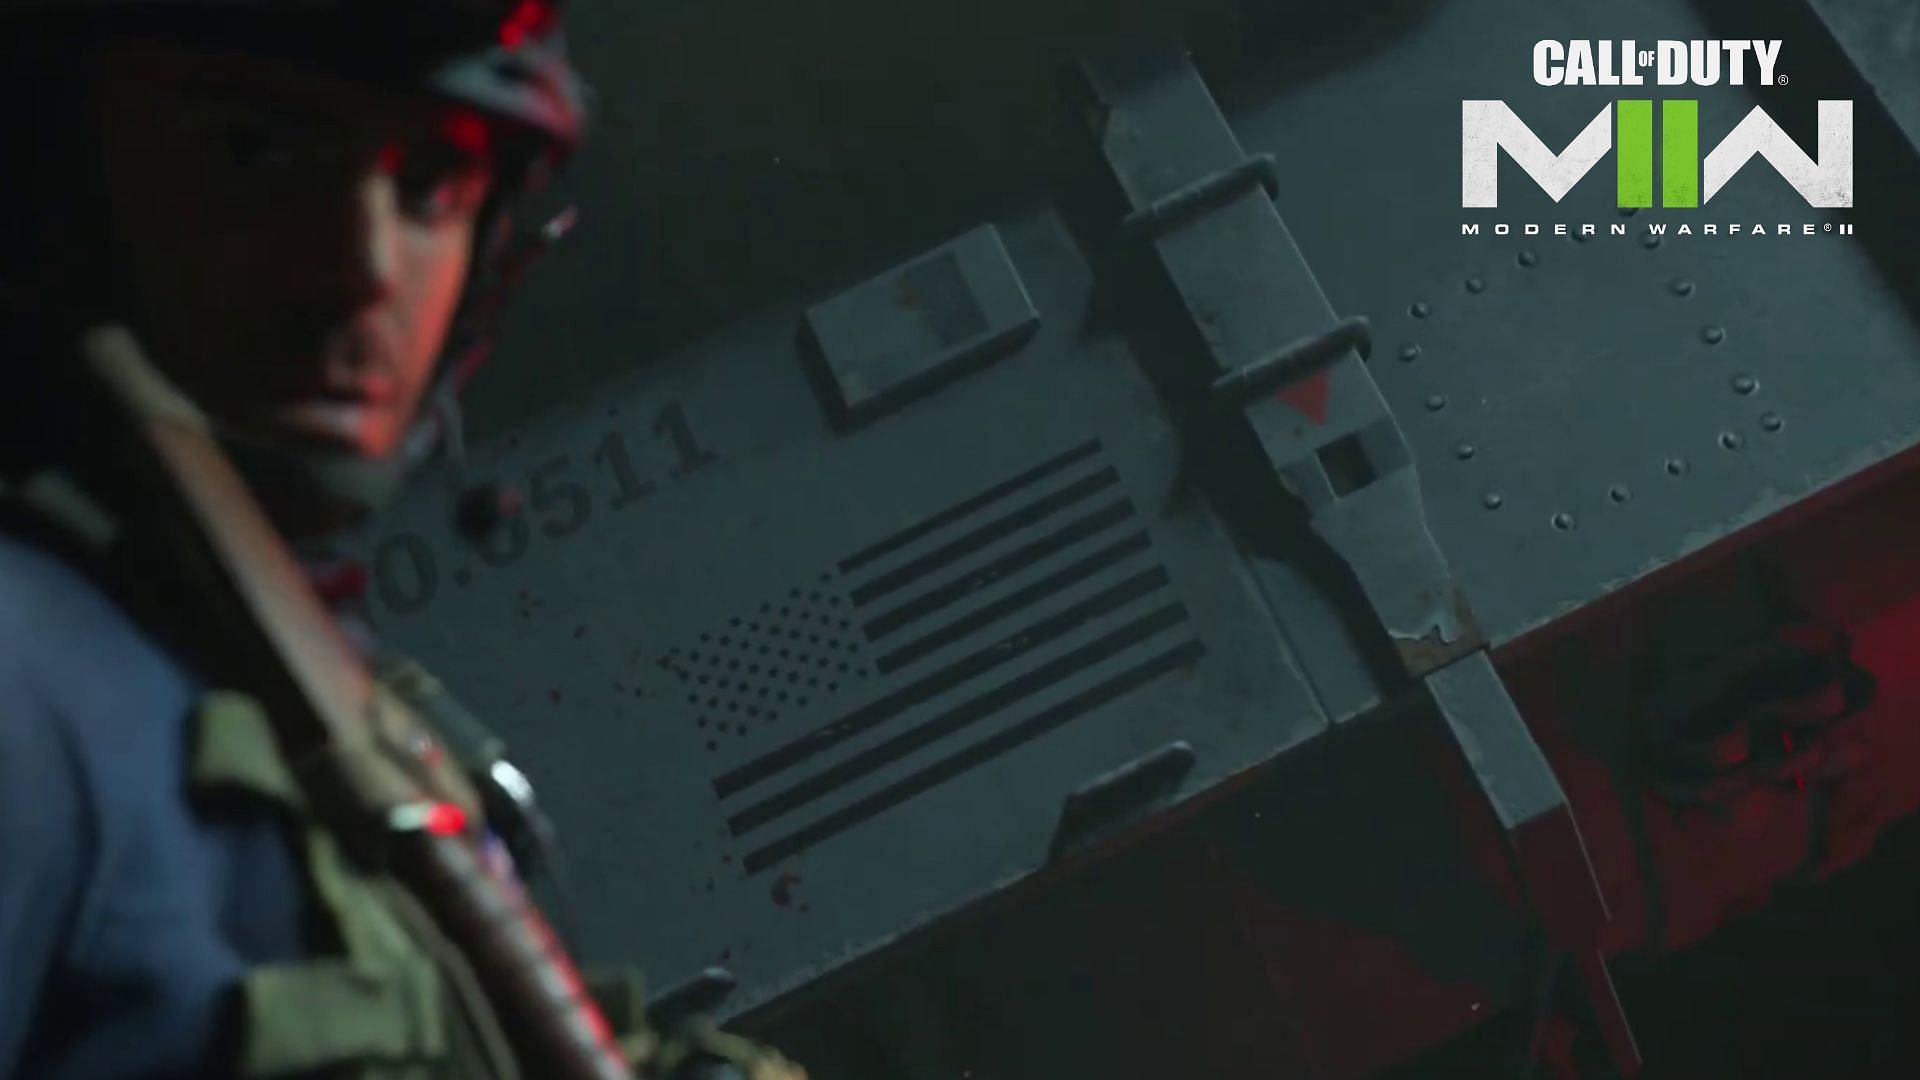 A U.S. flag can be spotted on the Mobile Launcher (Image via Activision)